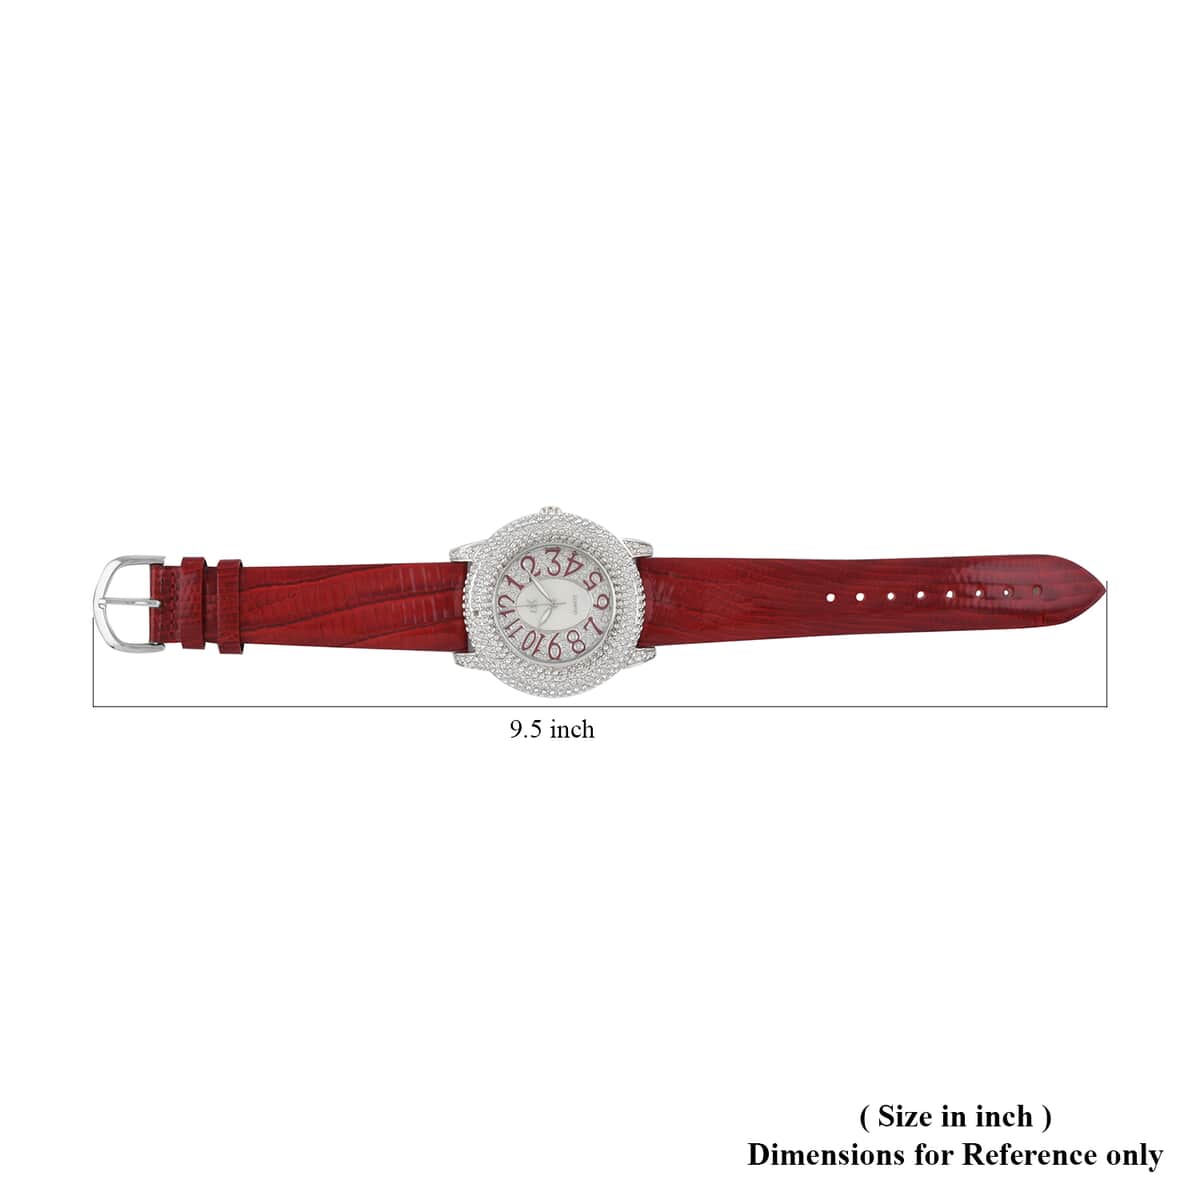 ADEE KAYE Bello Austrian Crystal Japanese Movement Watch with Genuine Leather Strap in Red (43mm) | Best Leather Watch for Women | Designer Women's Wrist Watch image number 5